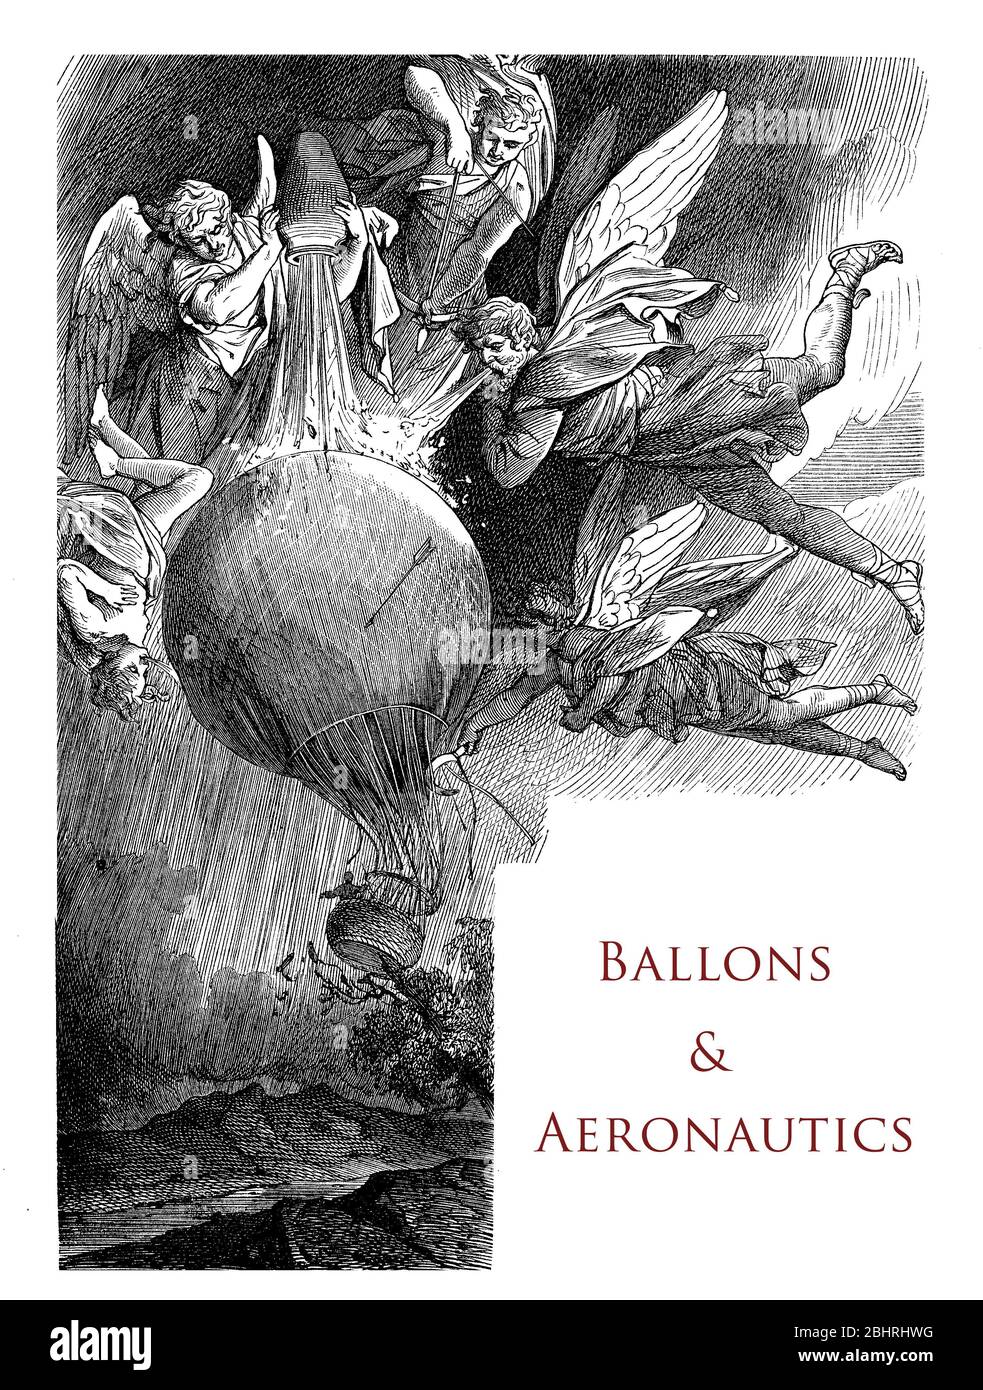 Typographic chapter page decoration about balloons and aeronautics with a mongolfiere, angels and mythological figures Stock Photo